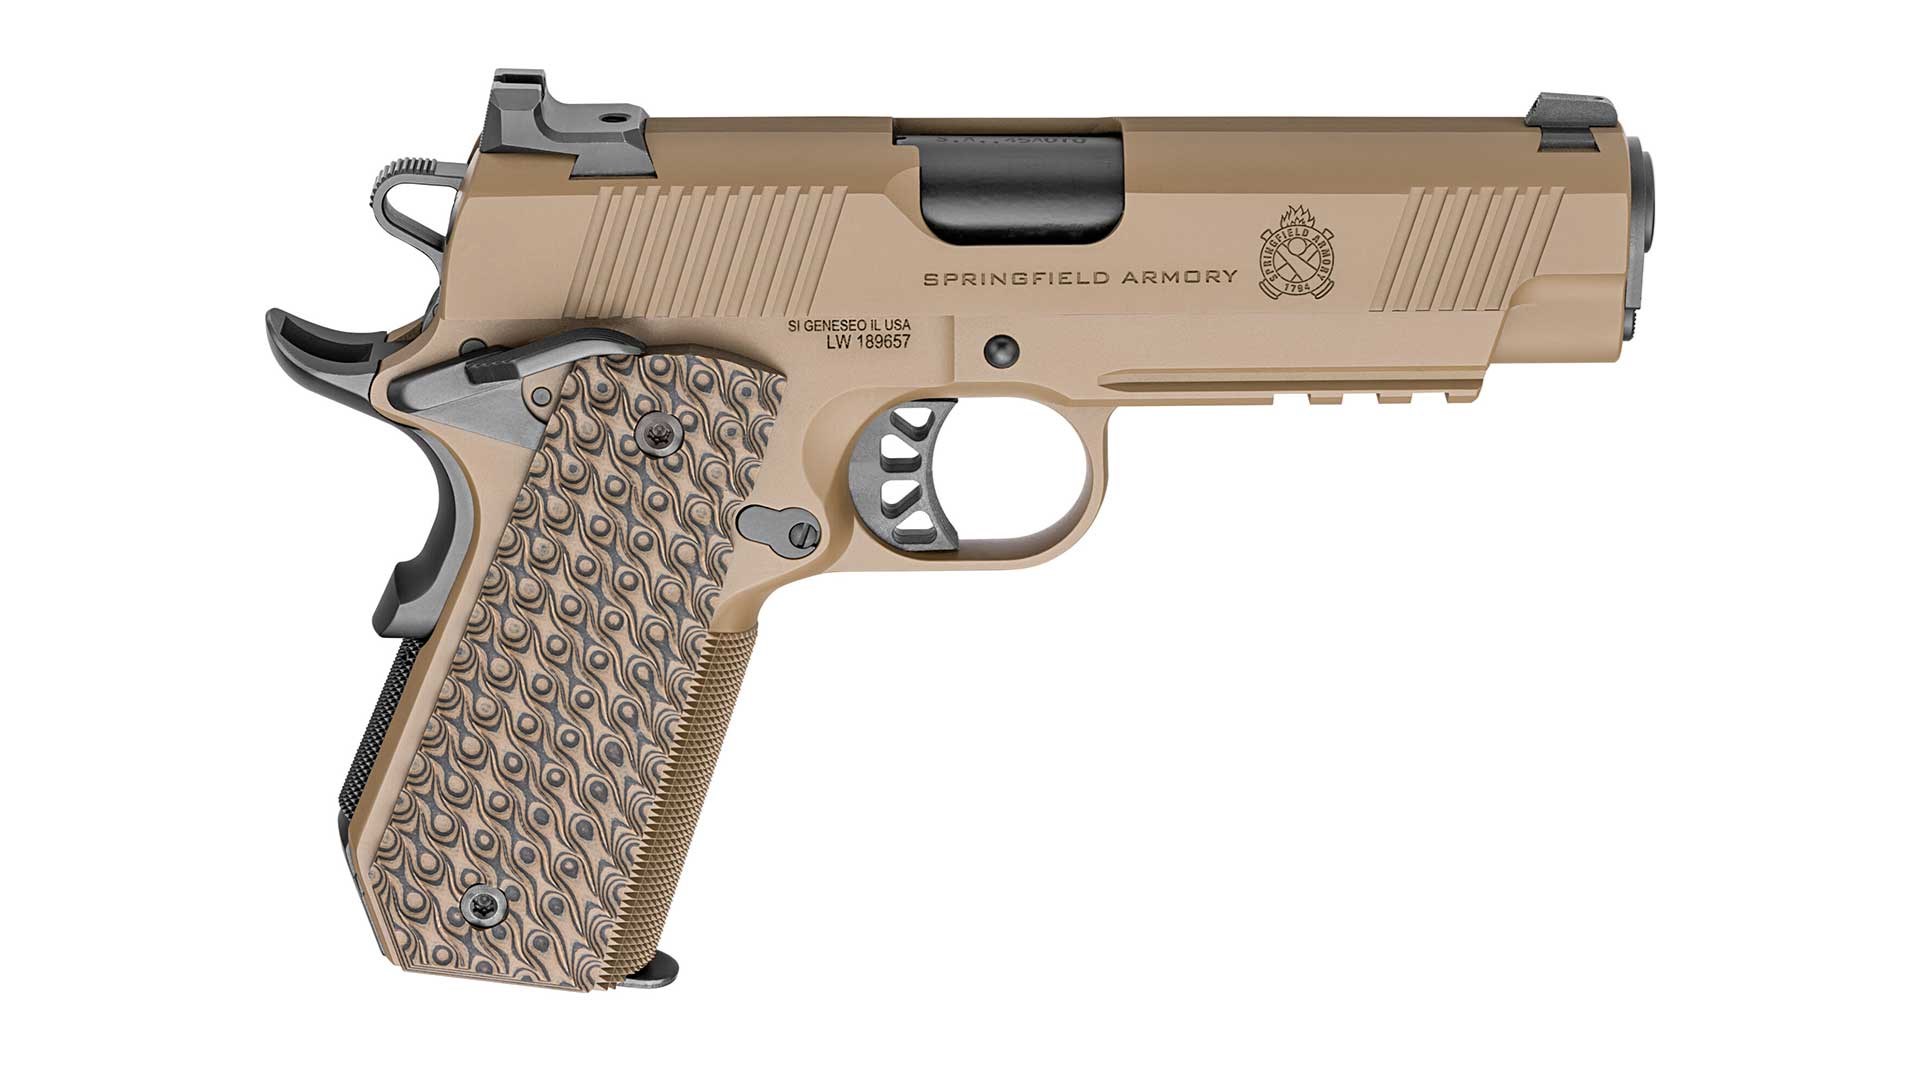 Right side of the FDE-colored Springfield Armory TRP 1911.